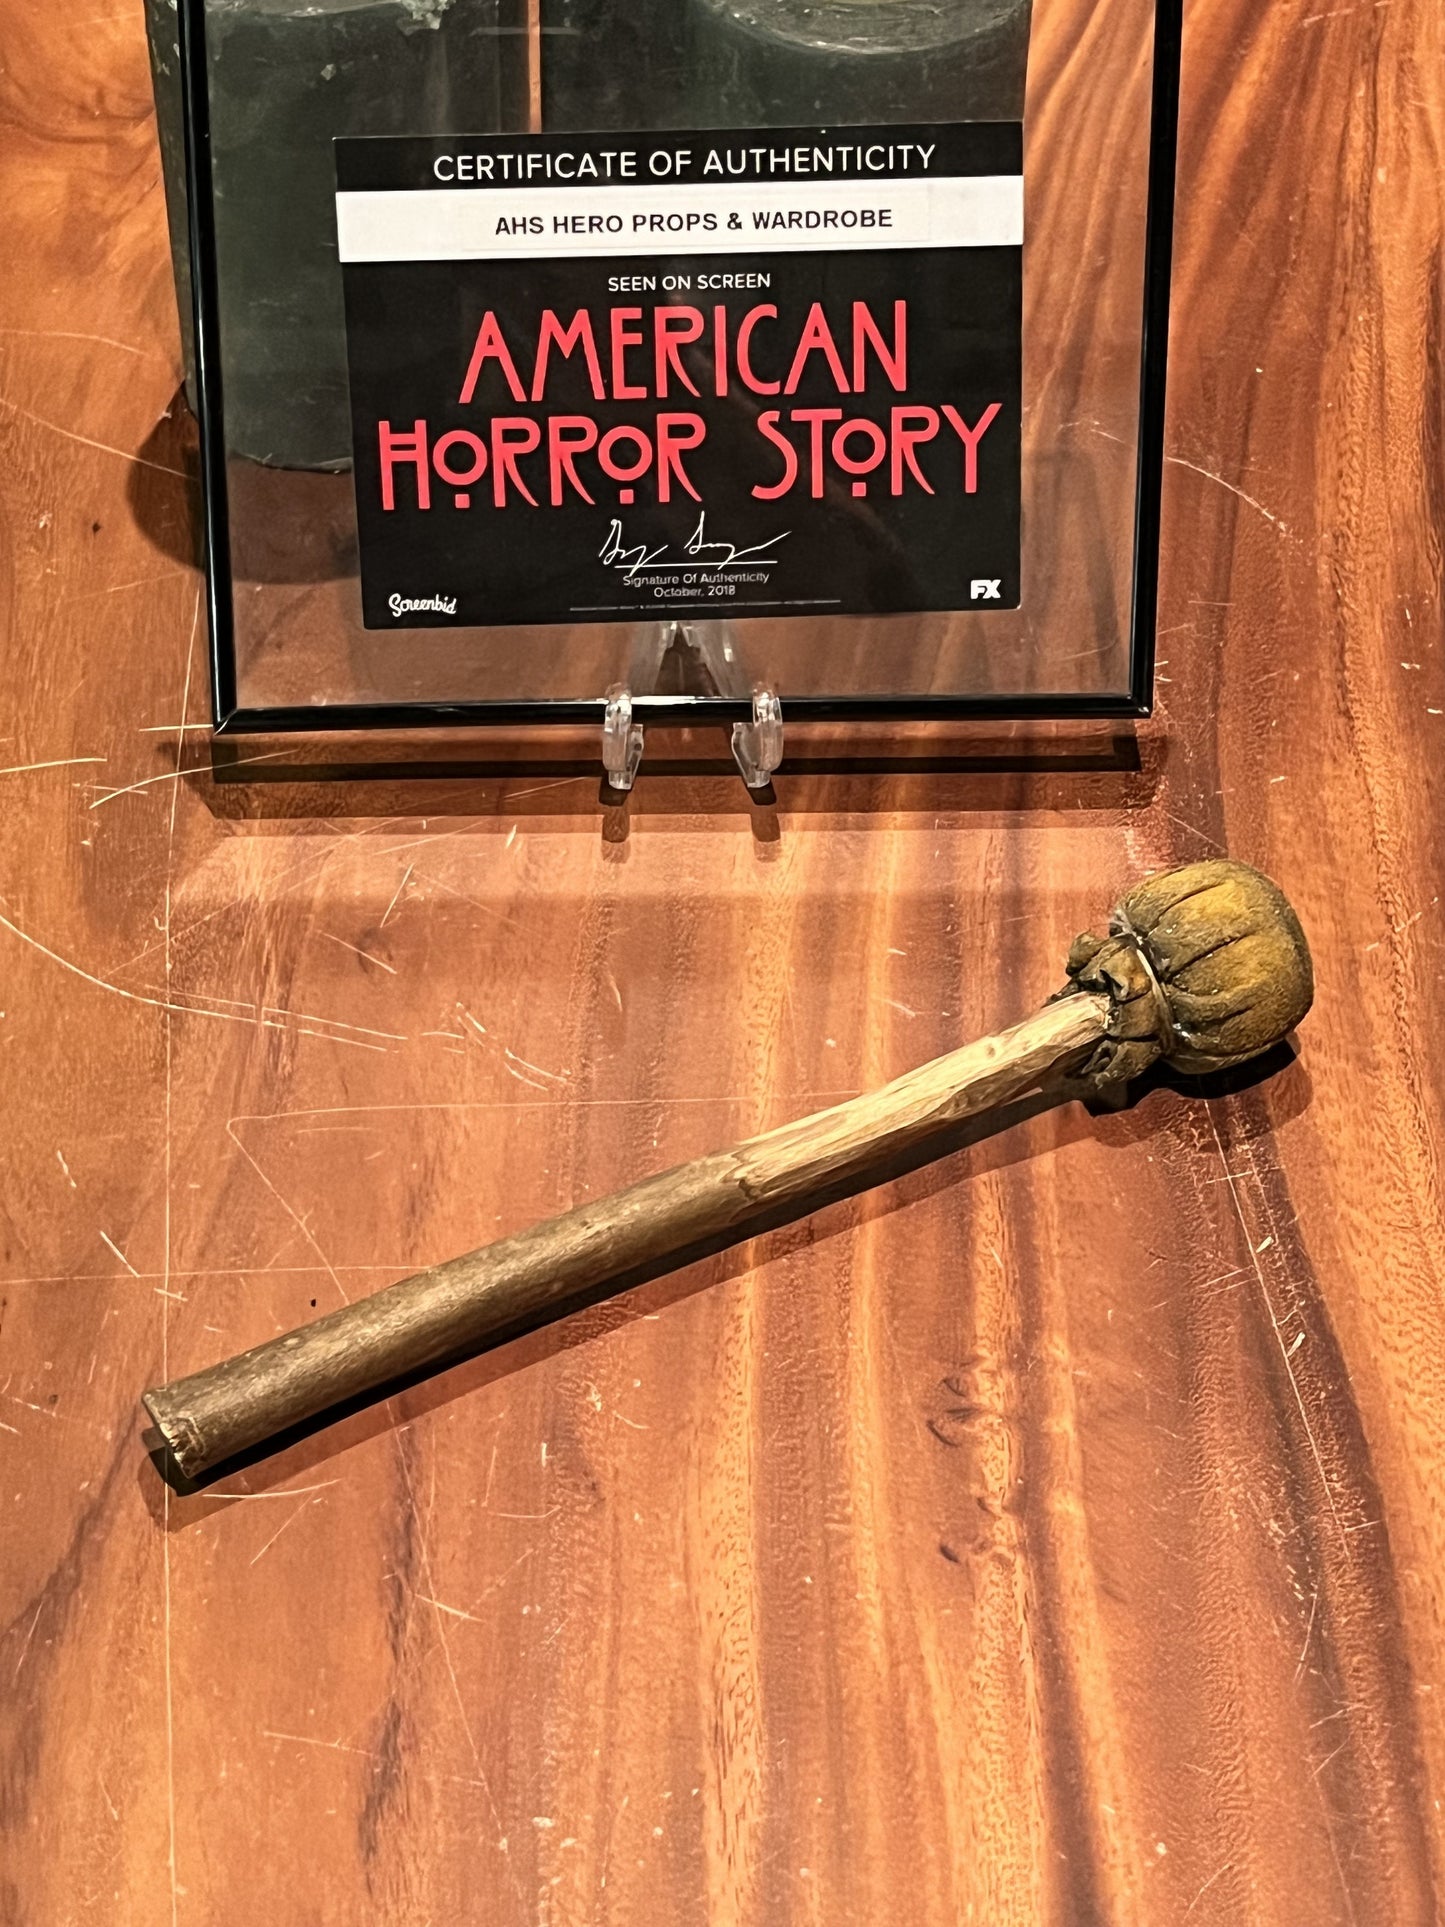 American Horror Story Asylum: Sister Mary Flame Thrower HERO Prop Featured On Screen